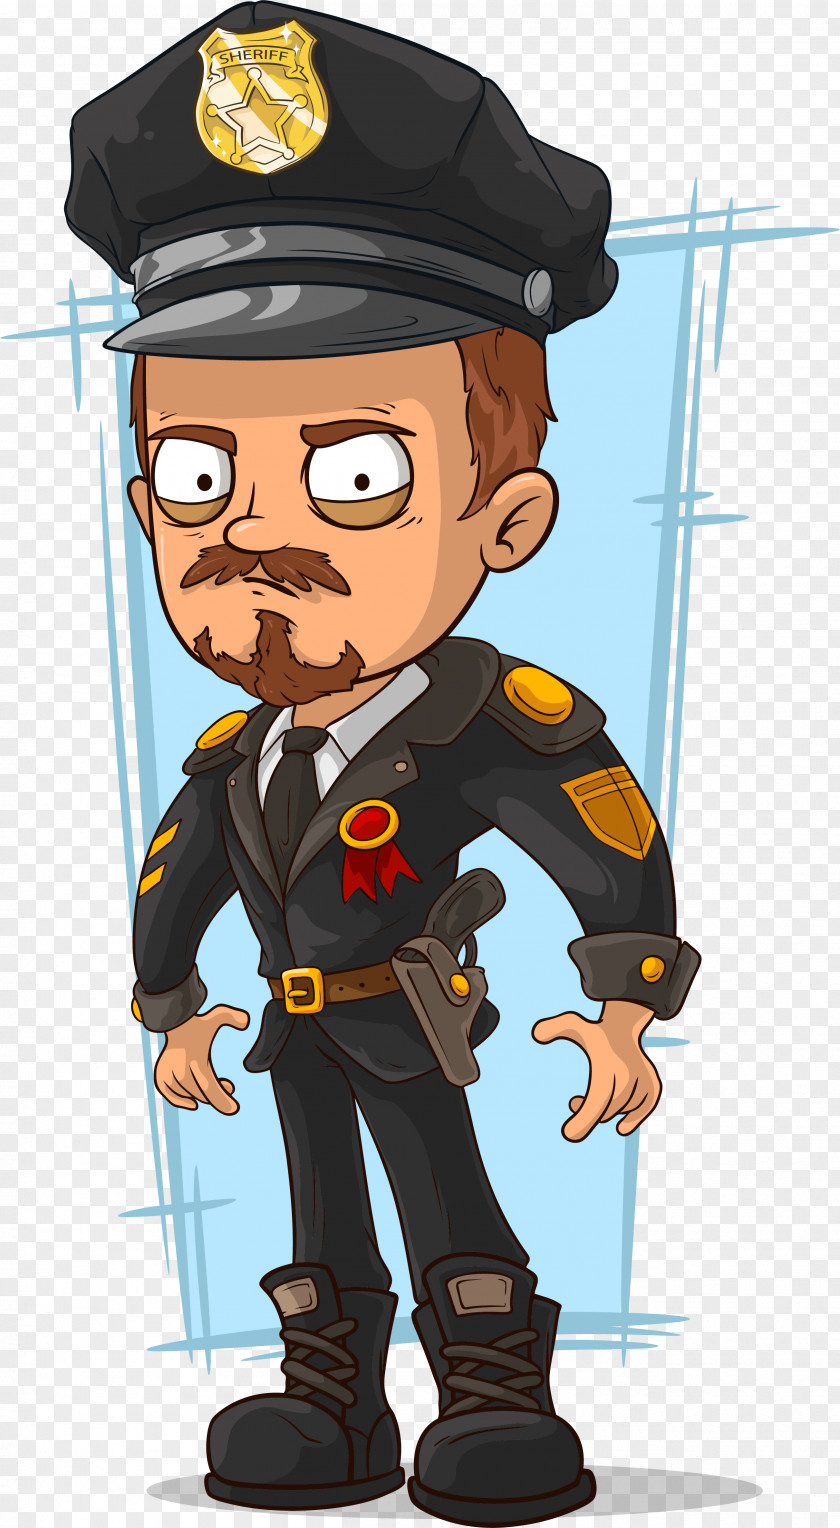 Hand Painted Police Officer Cartoon Stock Illustration PNG